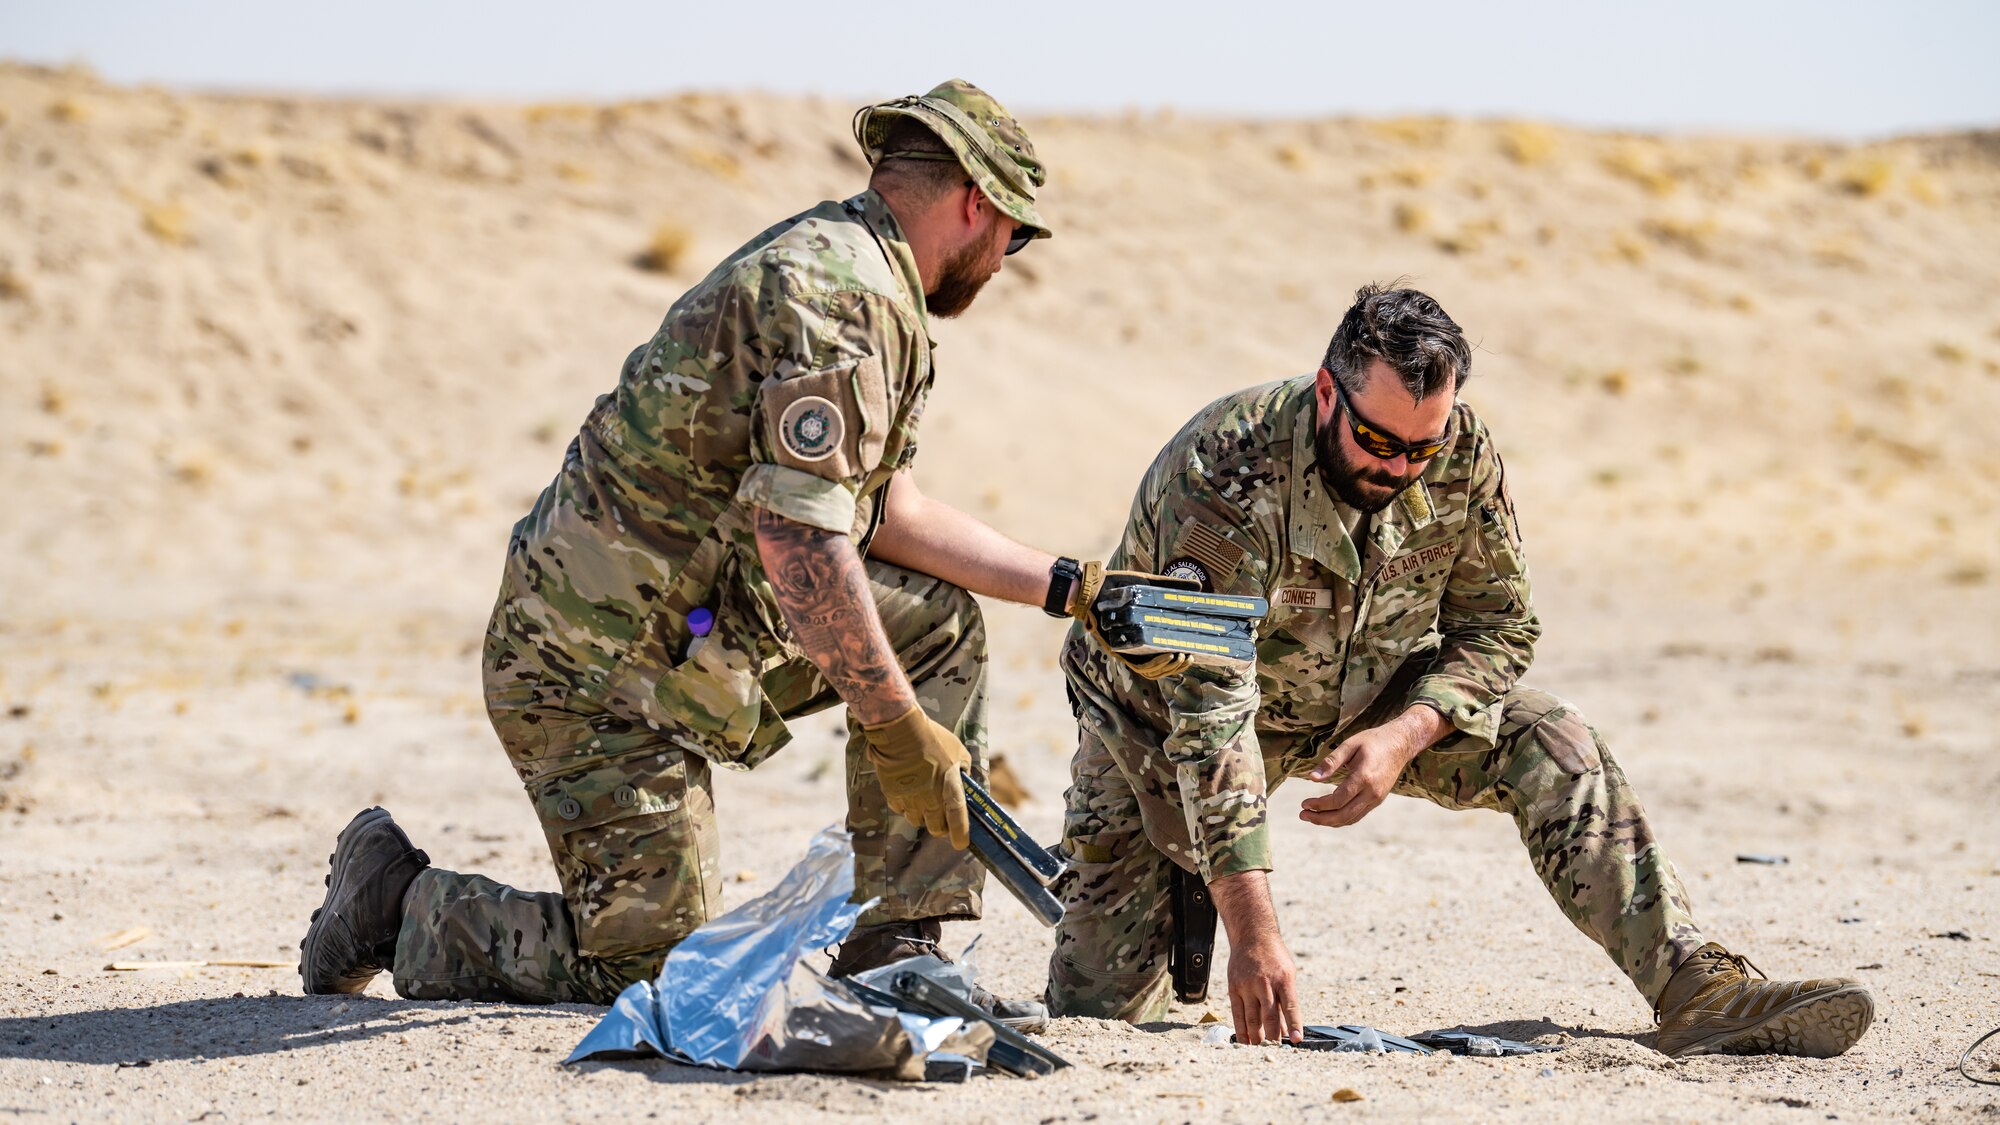 A U.S. Air Force explosive ordnance disposal (EOD) technician assigned to the 386th Expeditionary Civil Engineer Squadron lays out a detonation cord near Ali Al Salem Air Base, Kuwait, July 21, 2023. EOD technicians are experts in the safe handling and destruction of chemical, biological, incendiary, radiological and nuclear materials and devices, and they help ensure freedom of operations by removing such hazards. (U.S. Air Force photo by Staff Sgt. Kevin Long)